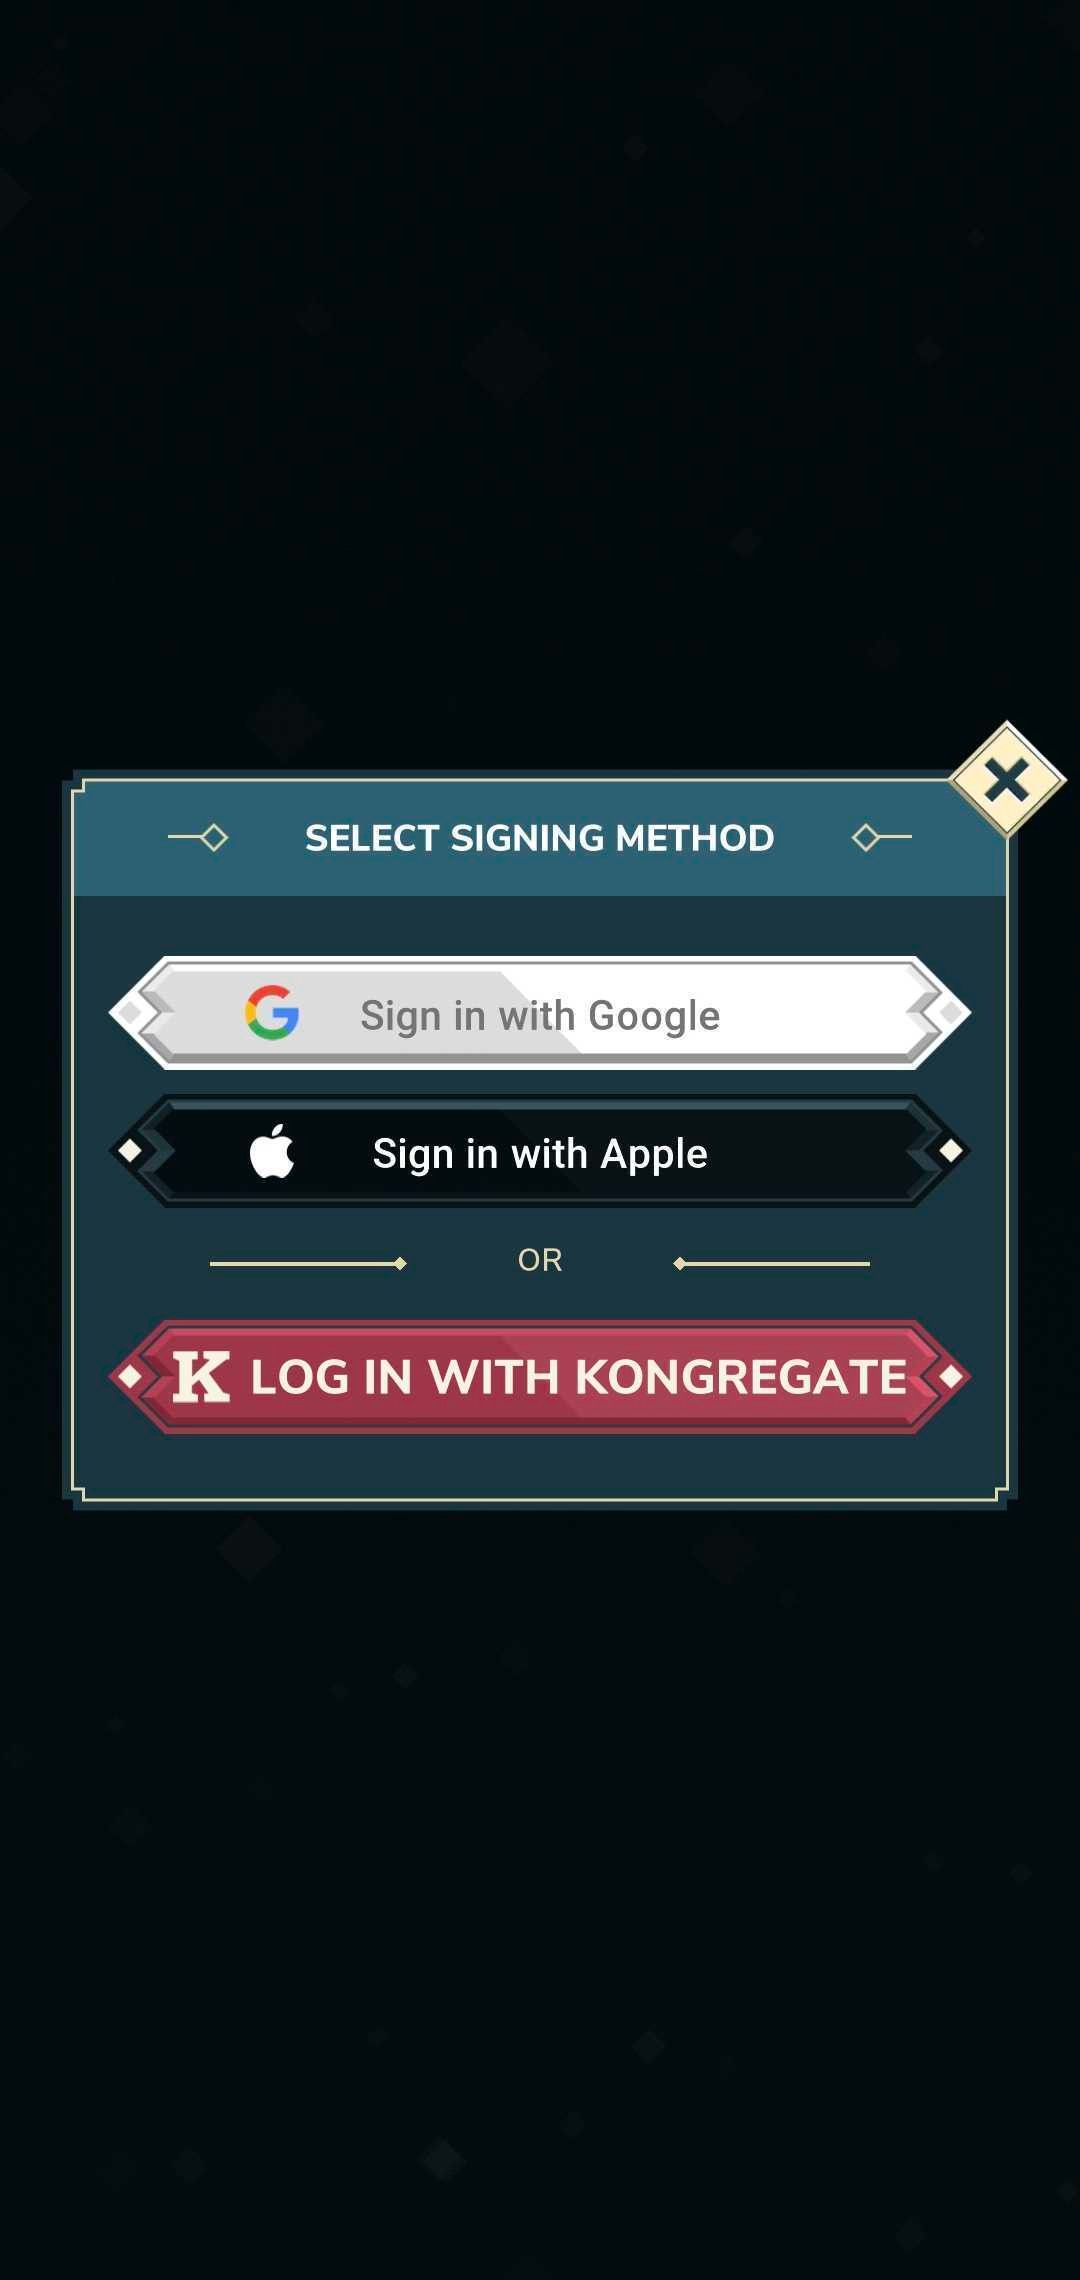 Screenshot of the signing process in the game, featuring 3 options: signing in with Google, with Apple or with Kongregate